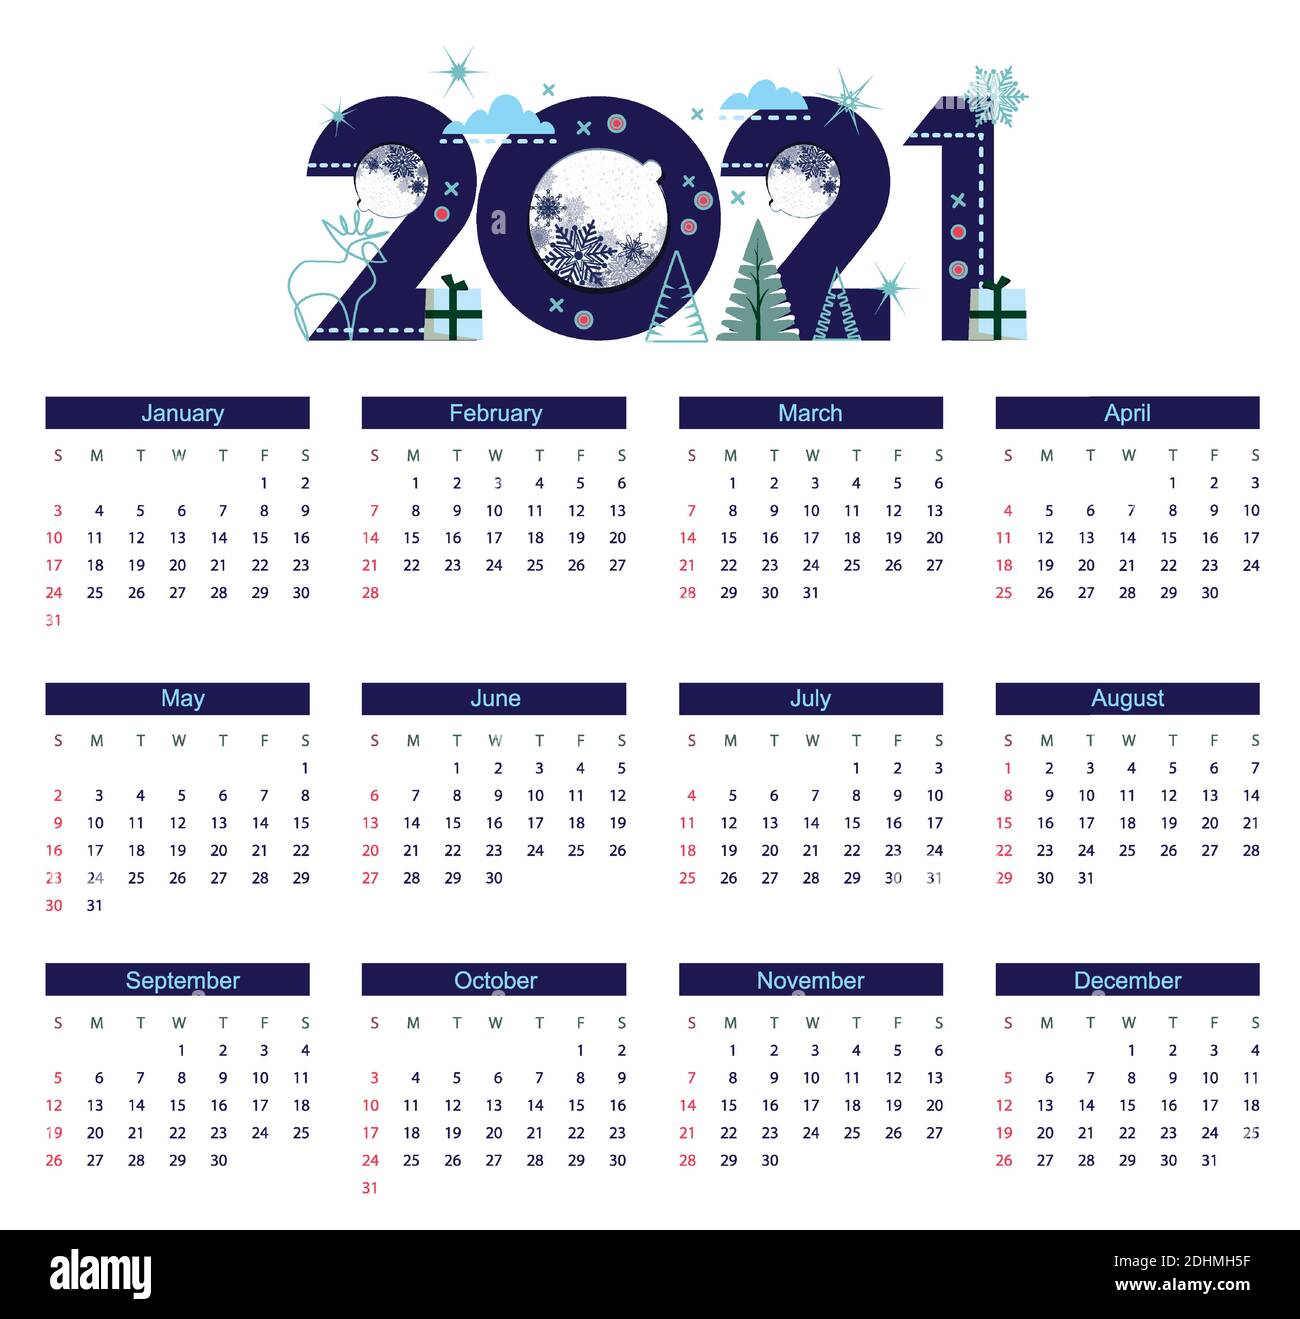 Calendar for 2021. Large text caption 2021 in flat design style with stylized icons of deer, gifts and christmas balls.  Stock Vector